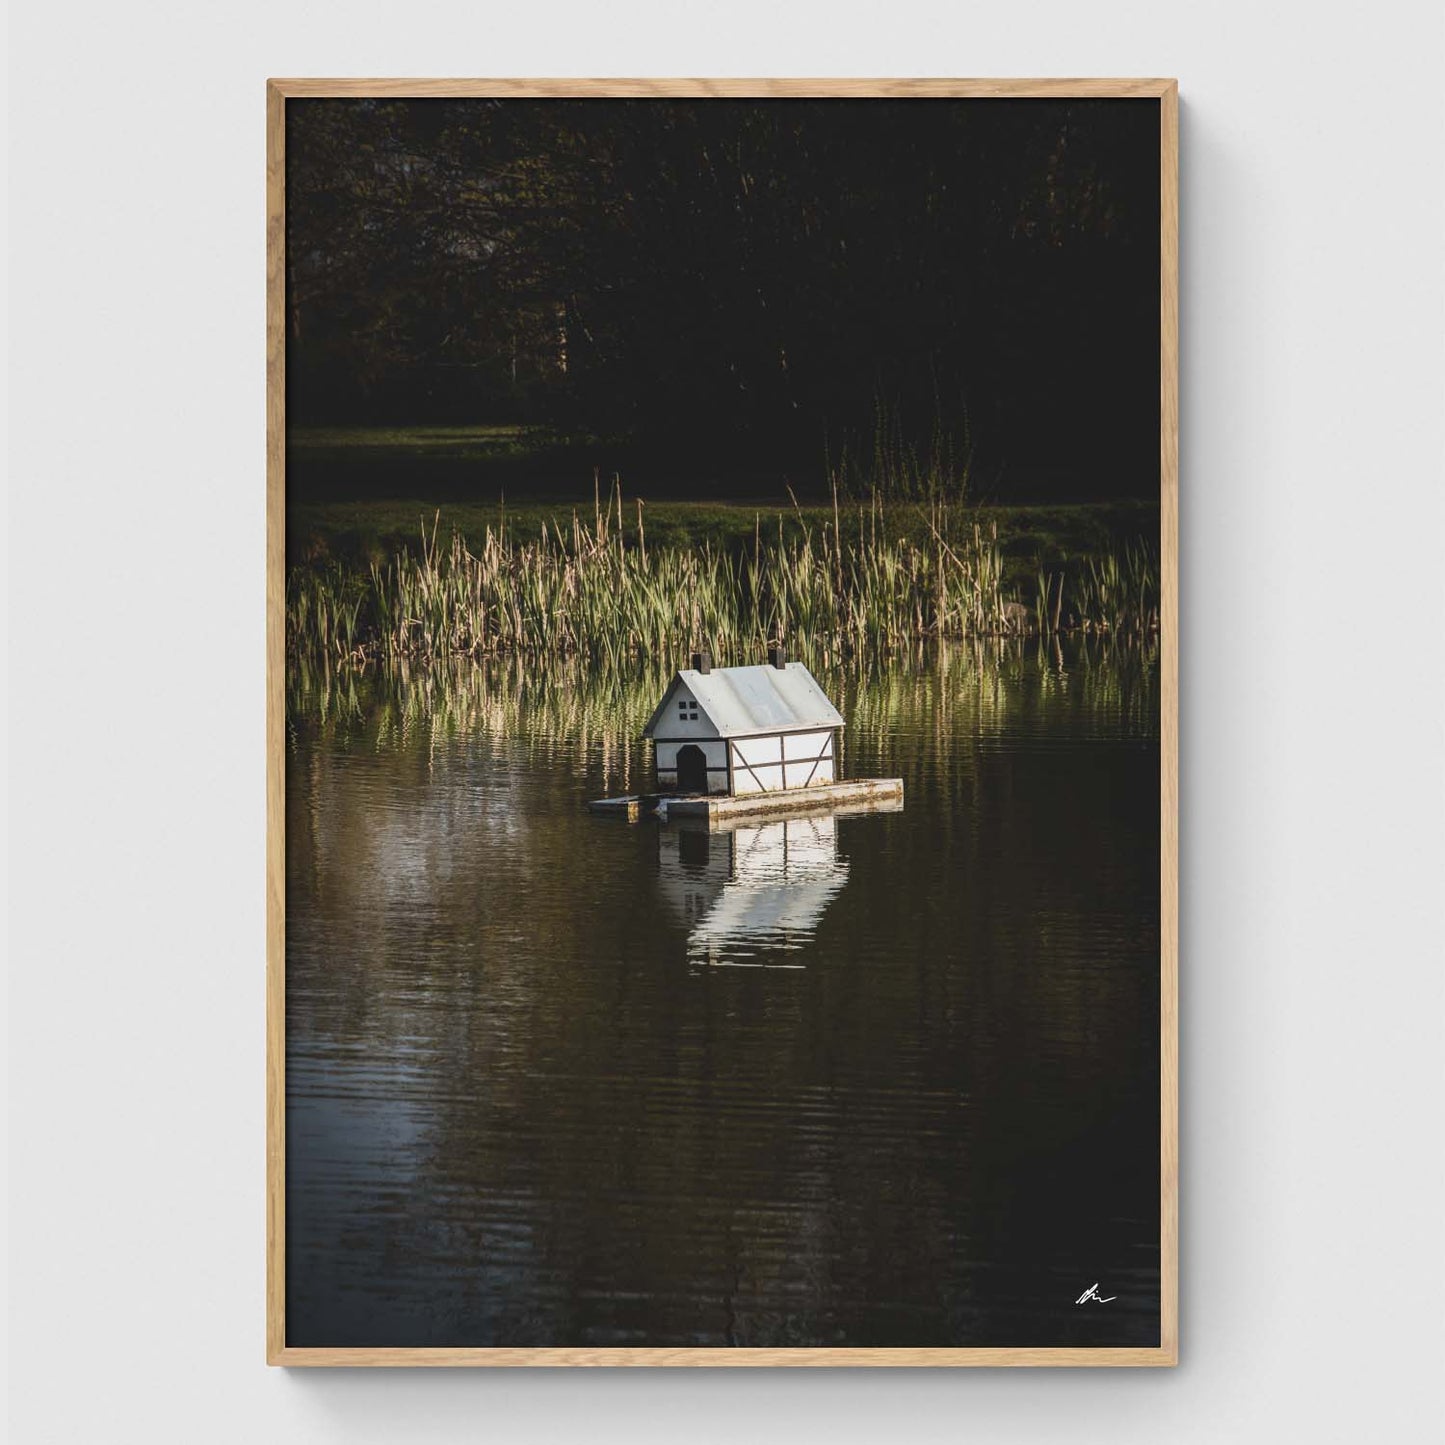 Duck house in the lake